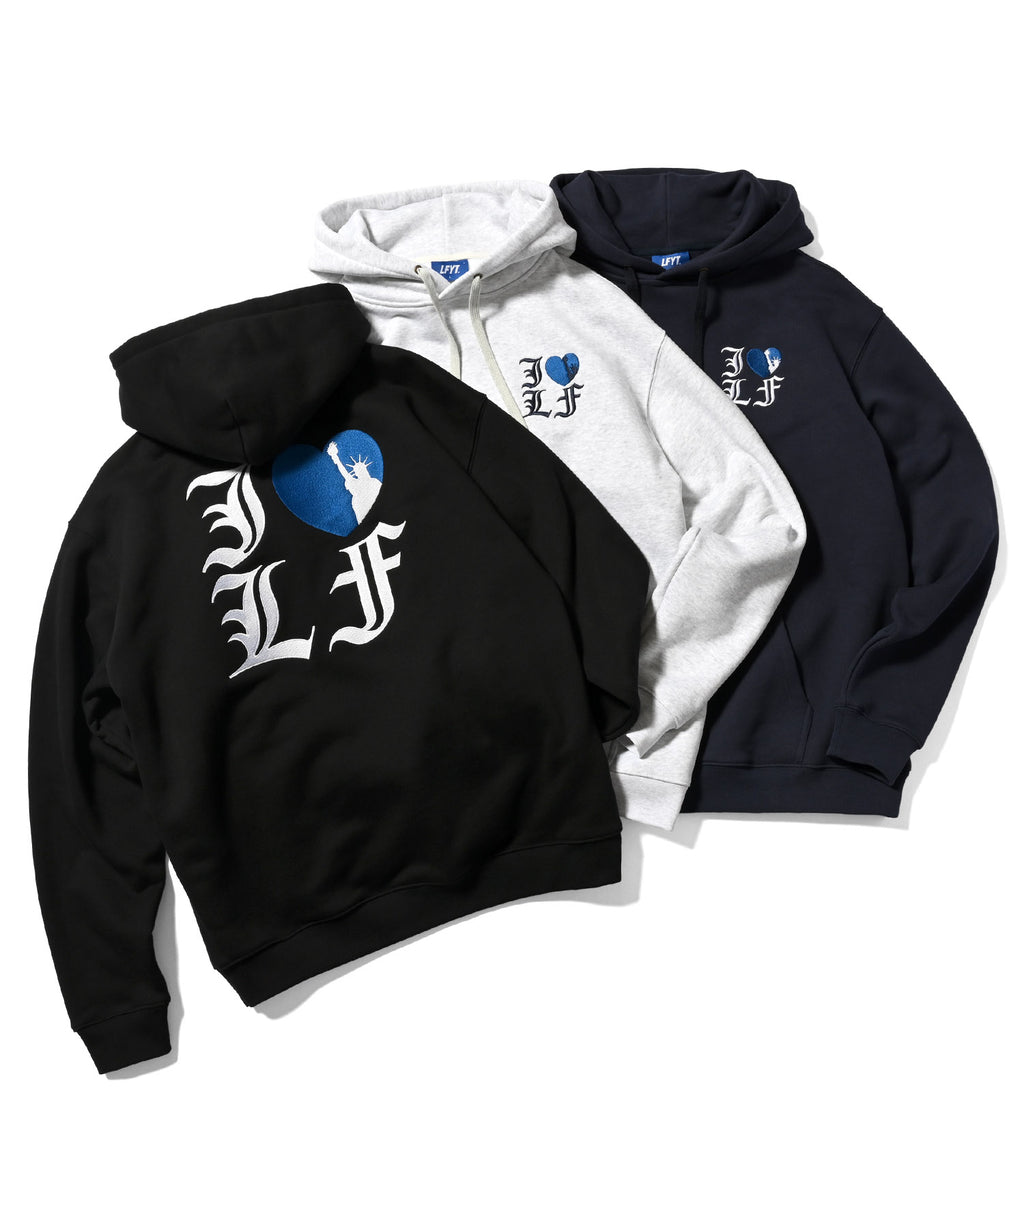 Online shopping for HOODIE | LFYT OFFICIAL SITE